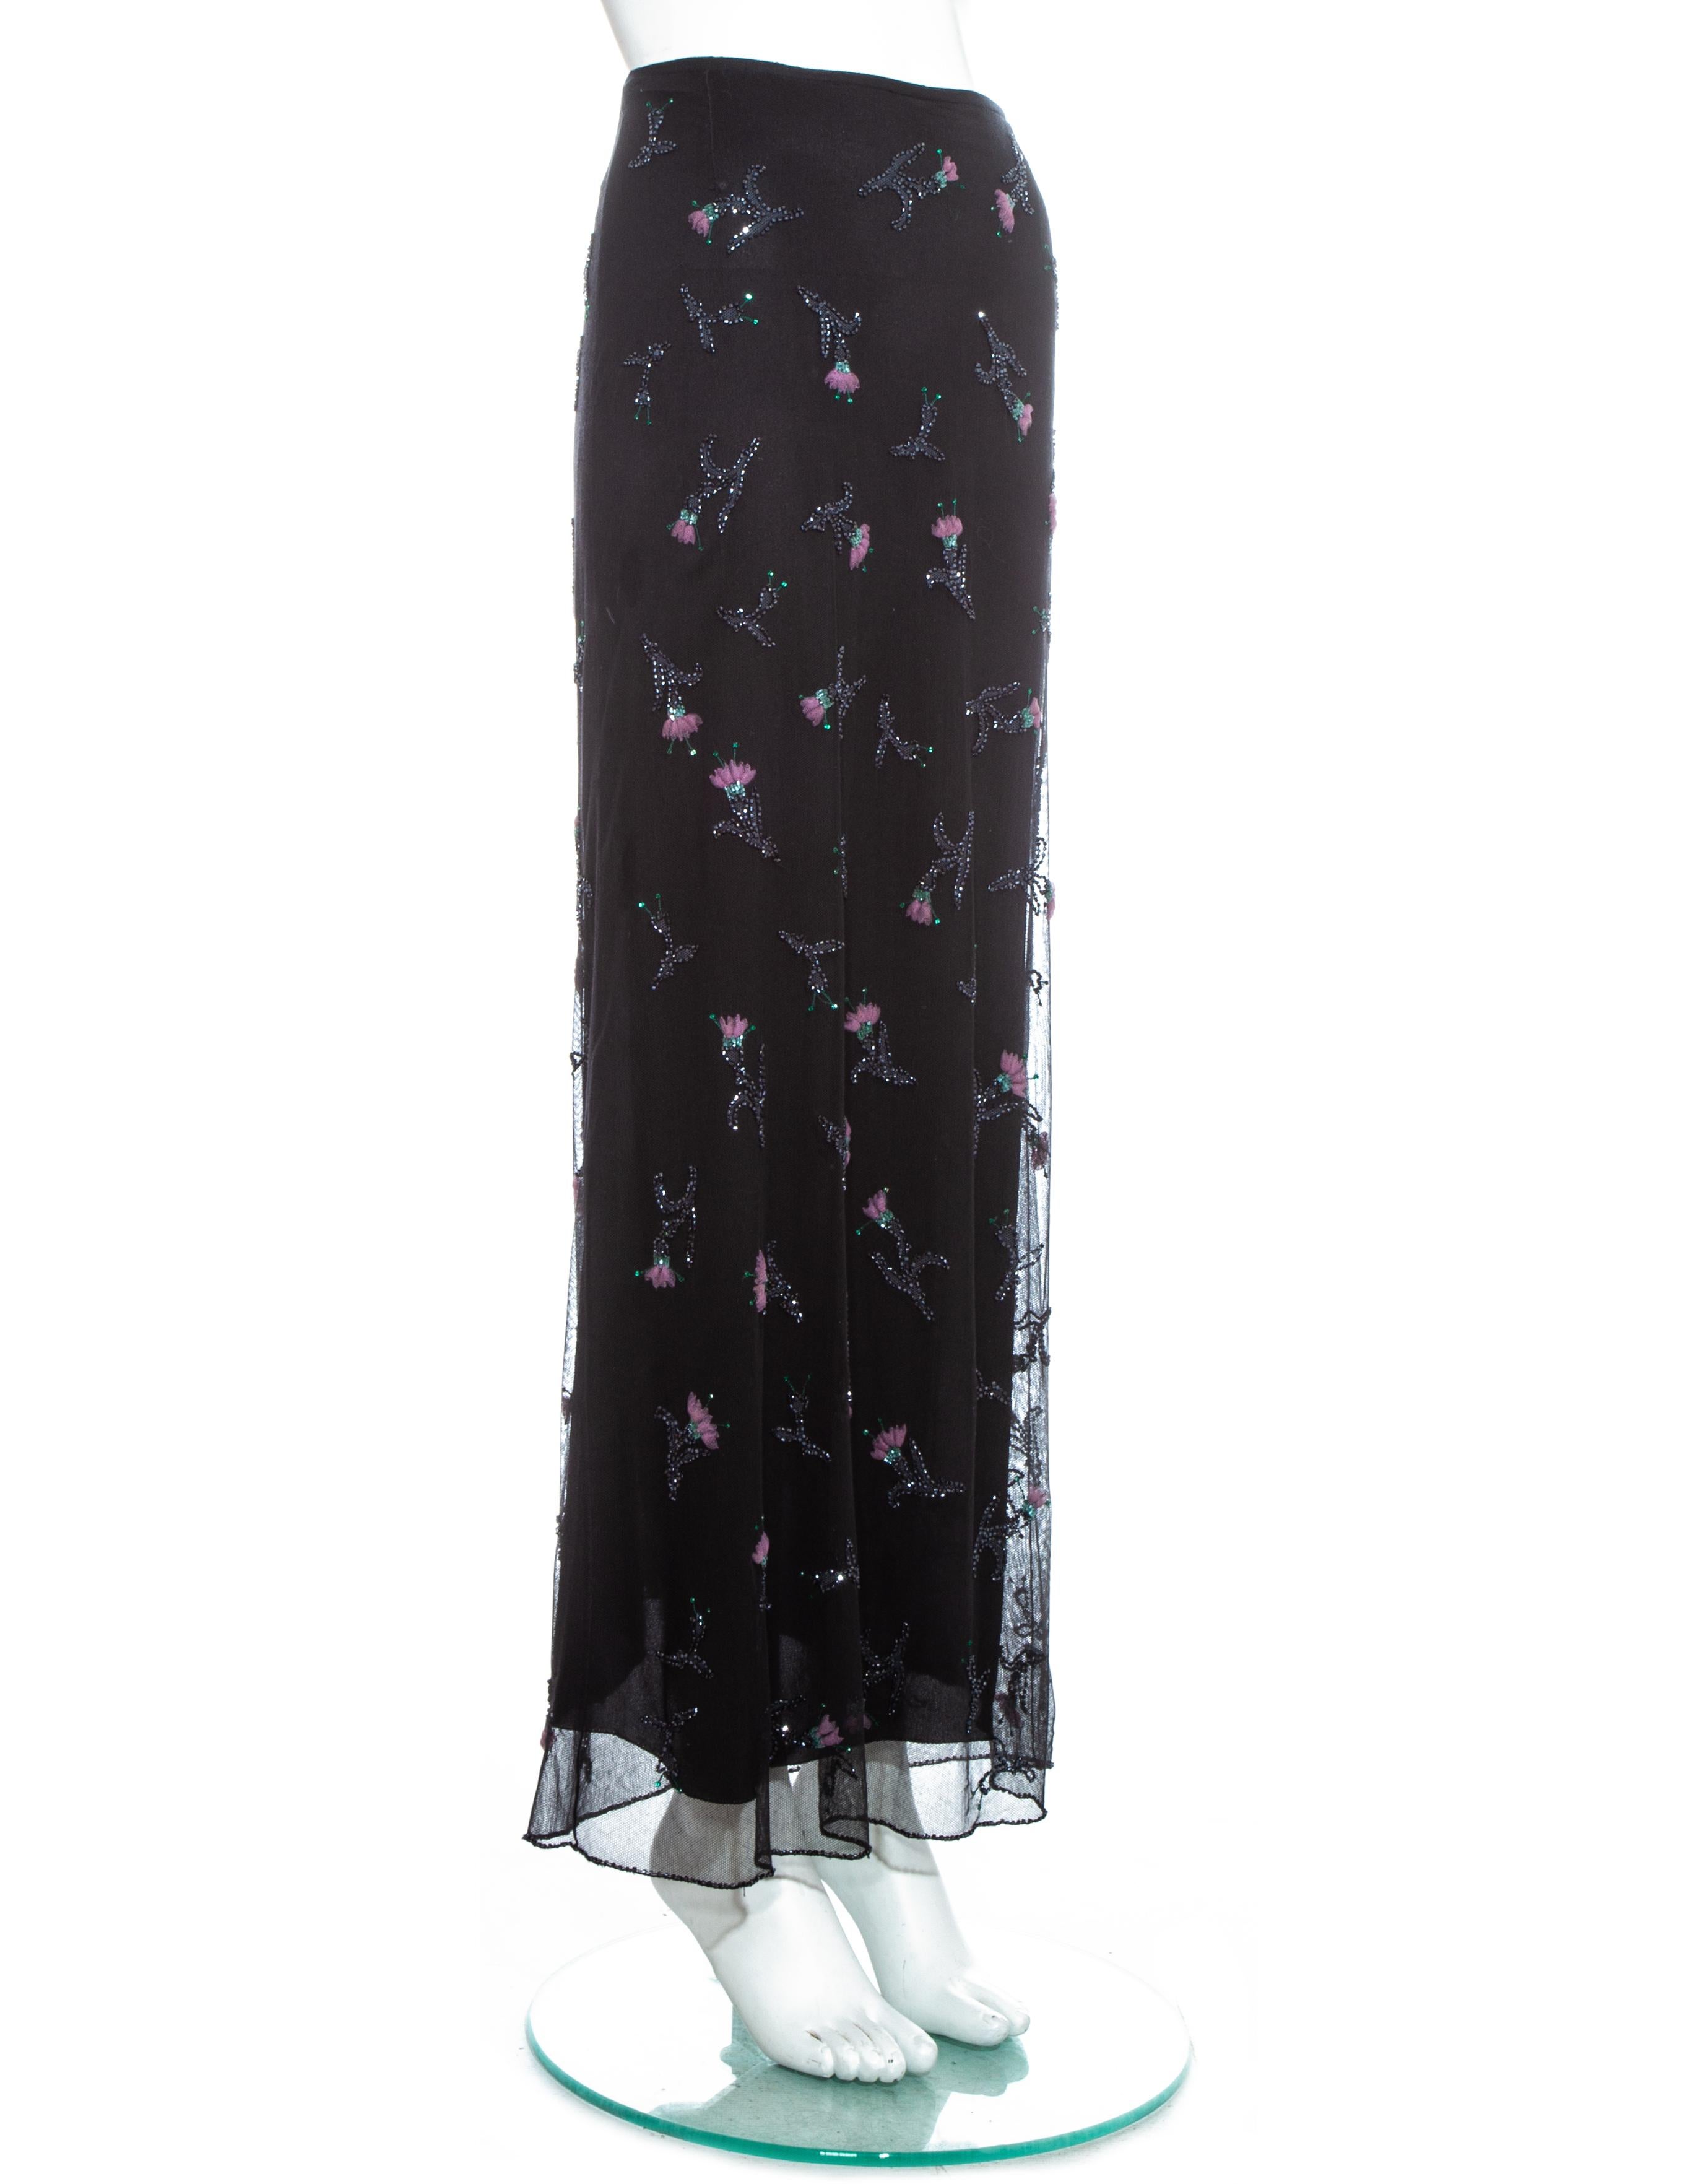 Prada black mesh maxi skirt with floral beading and embroidery.

Fall-Winter 1997